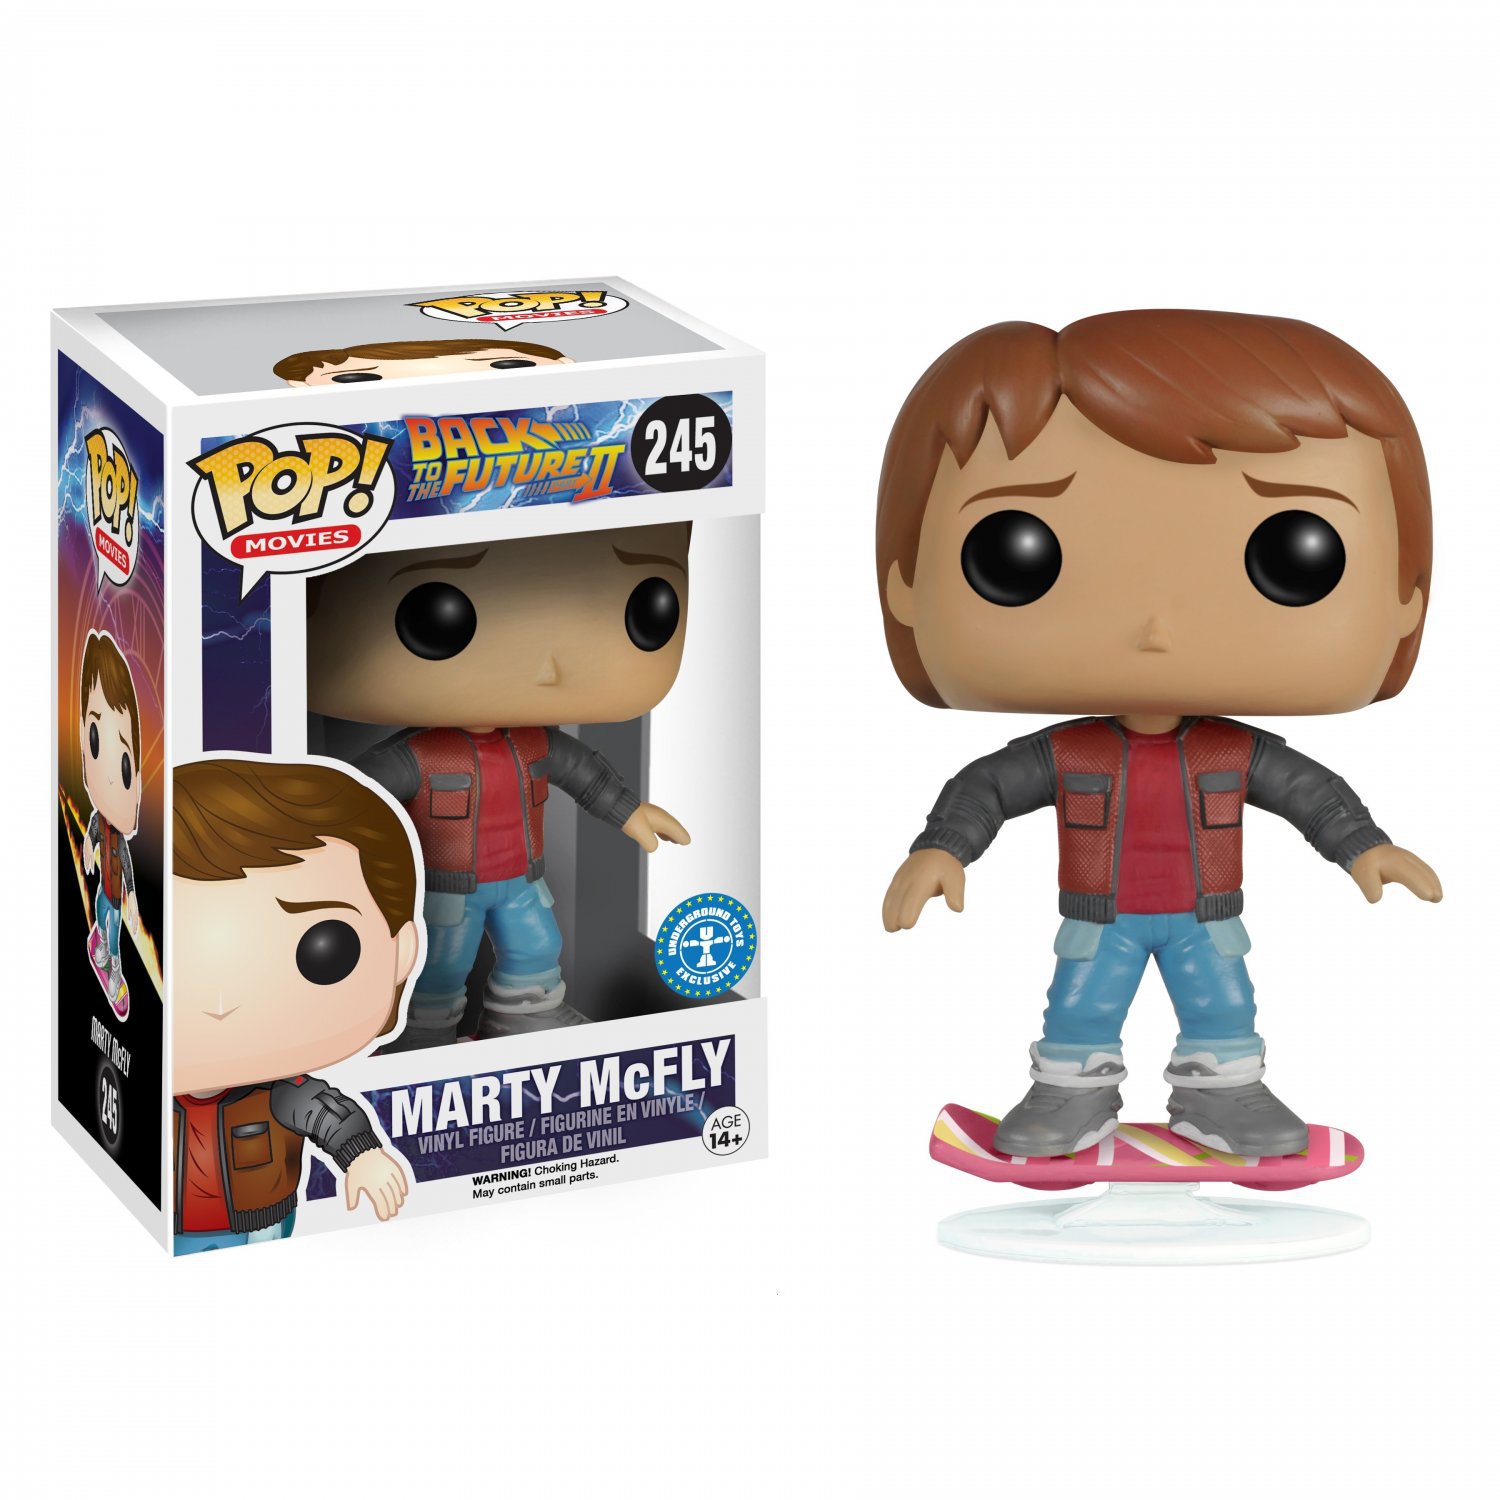 Funko POP! Marty McFly 245 Back to the Future Vinyl Action Figure Toys